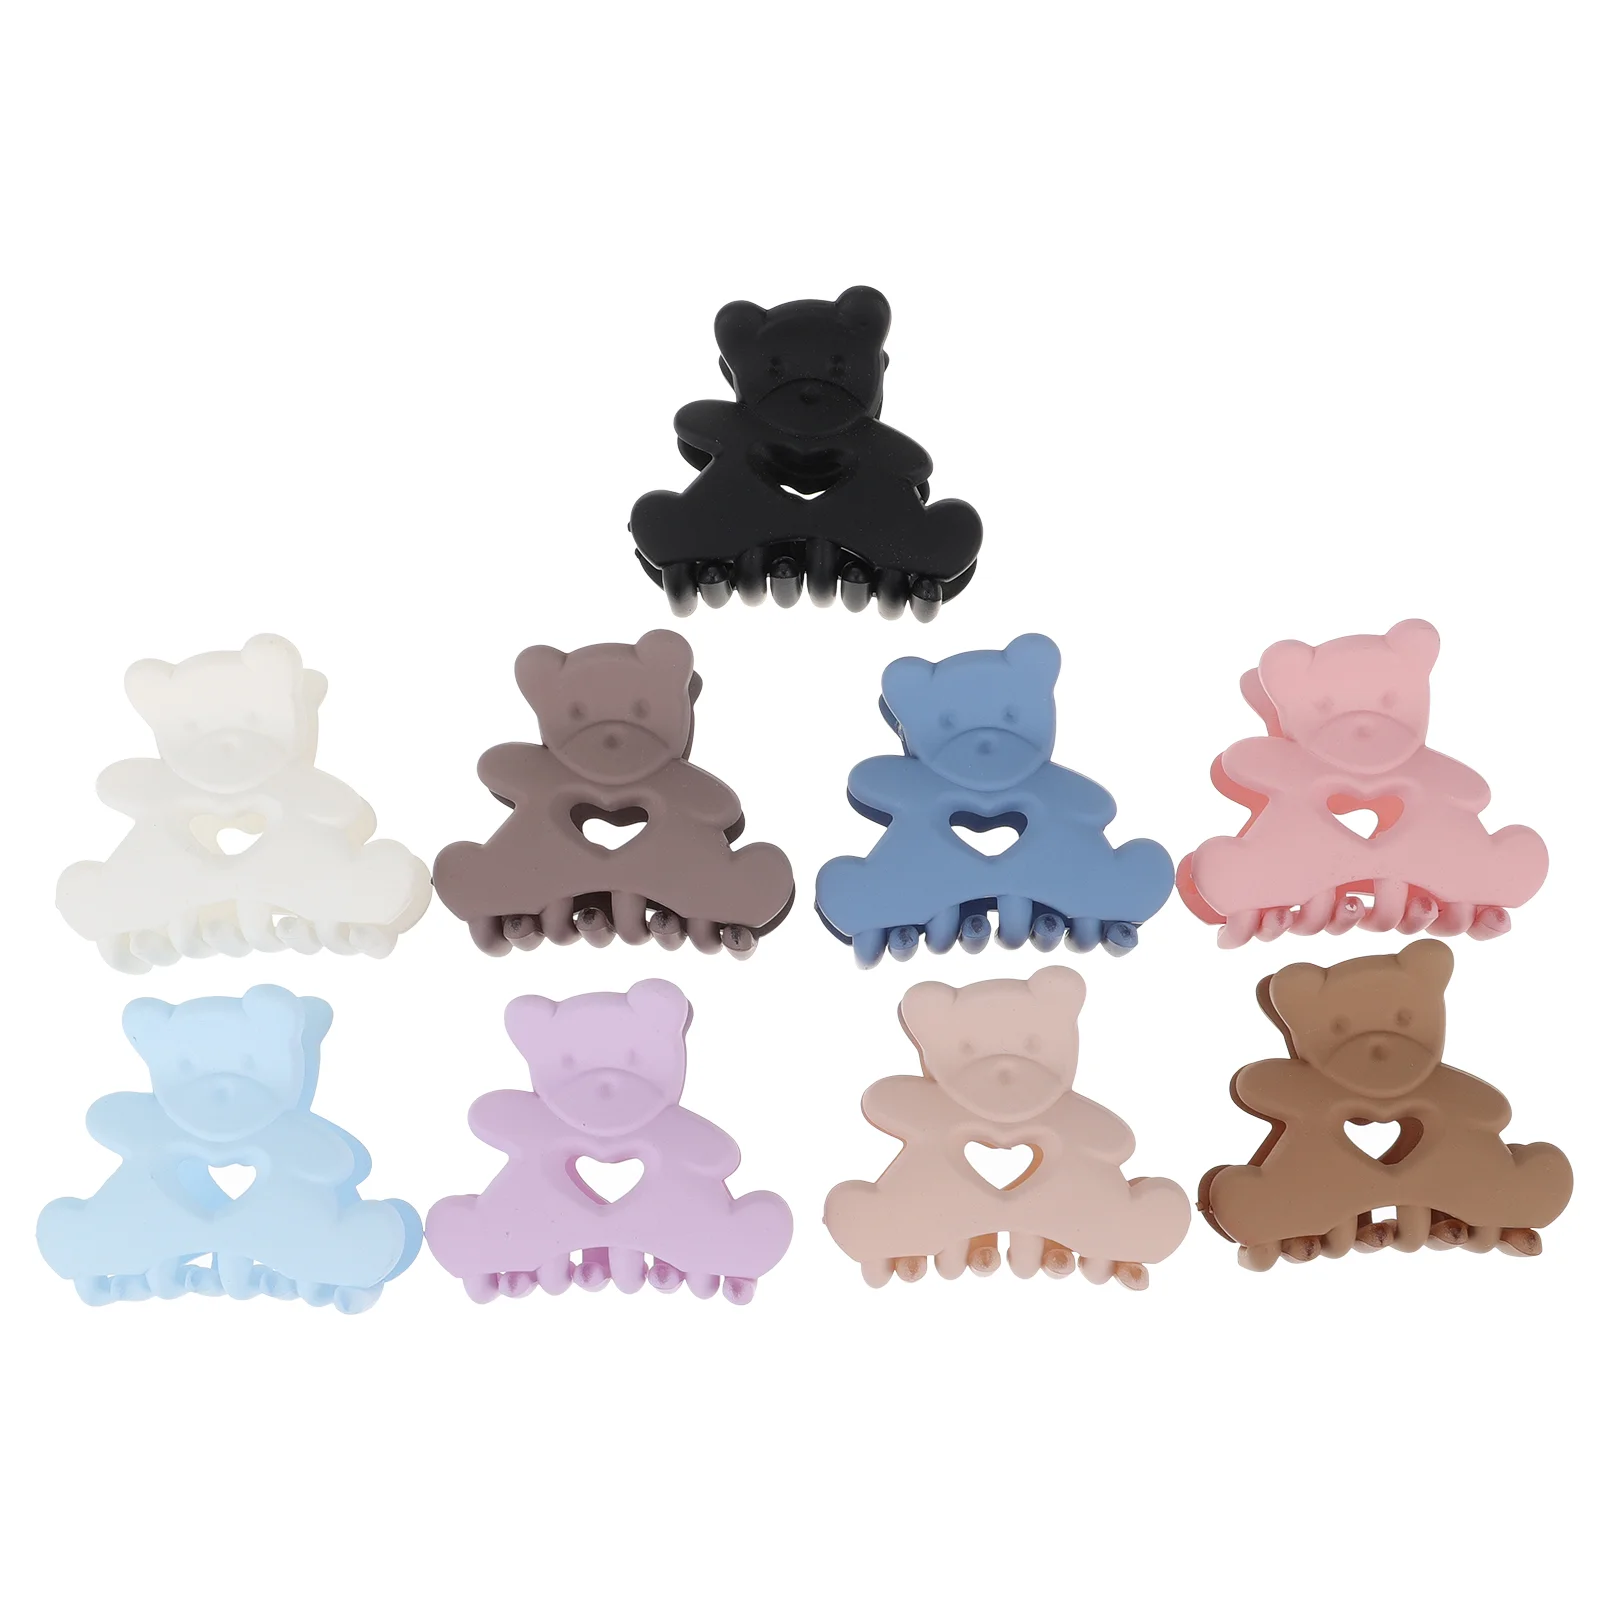 

9 Pcs Hairpin Supplies Plastic Tiara Jaw Clips Mini Claw Barrettes Colorful Clamps Cute Claws Woman Headdress